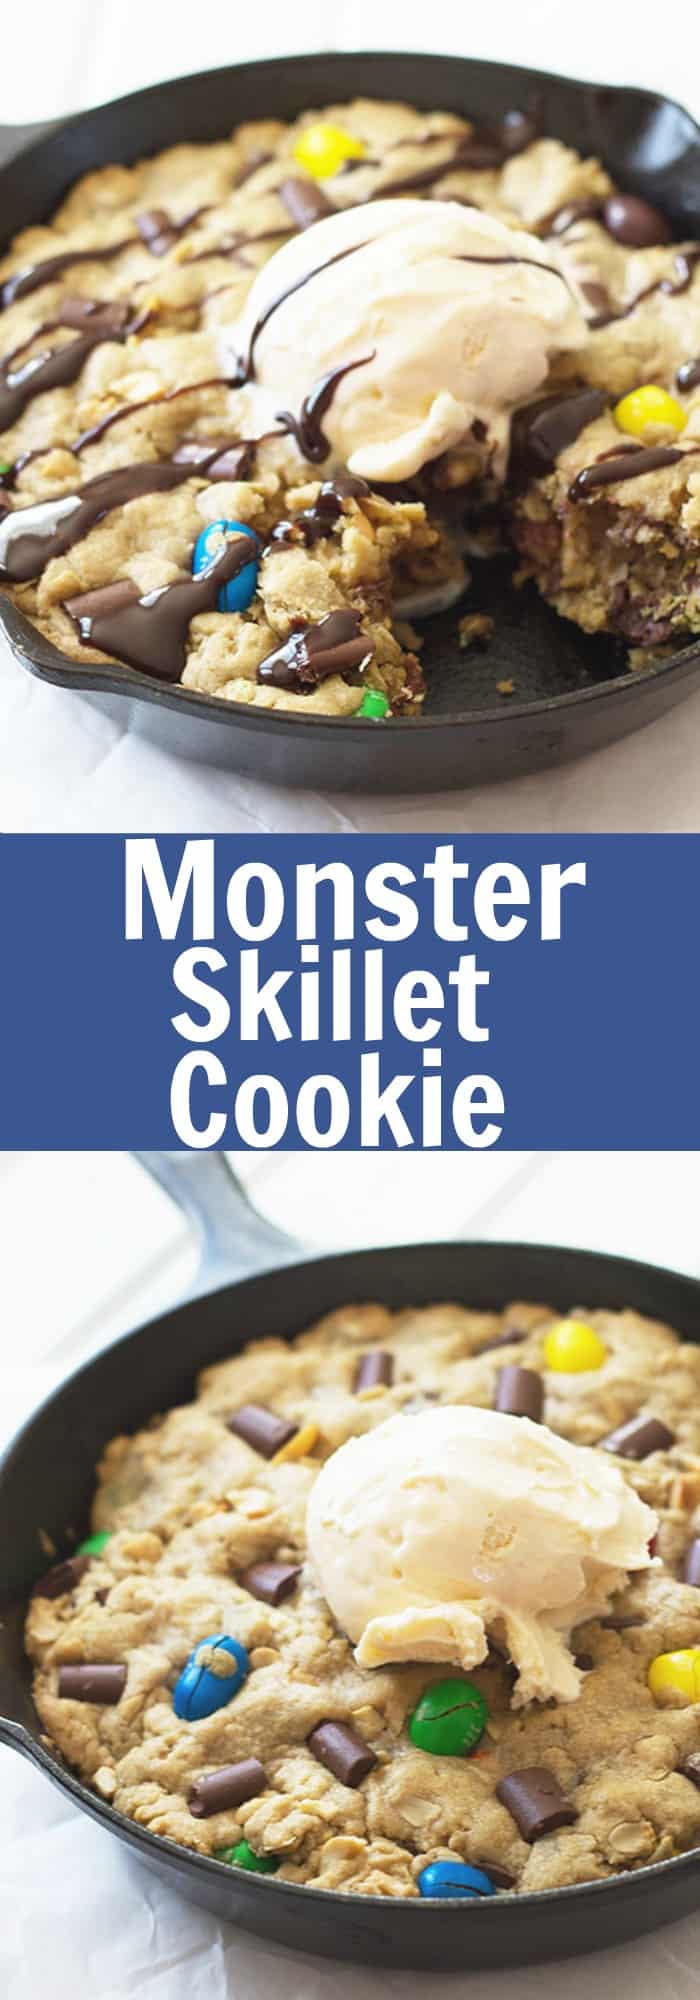 Monster Skillet Cookie -this pizookie is full of M&M's, chocolate chunks, peanuts and all wrapped up in an ooey gooey cookie! | countrysidecravings.com